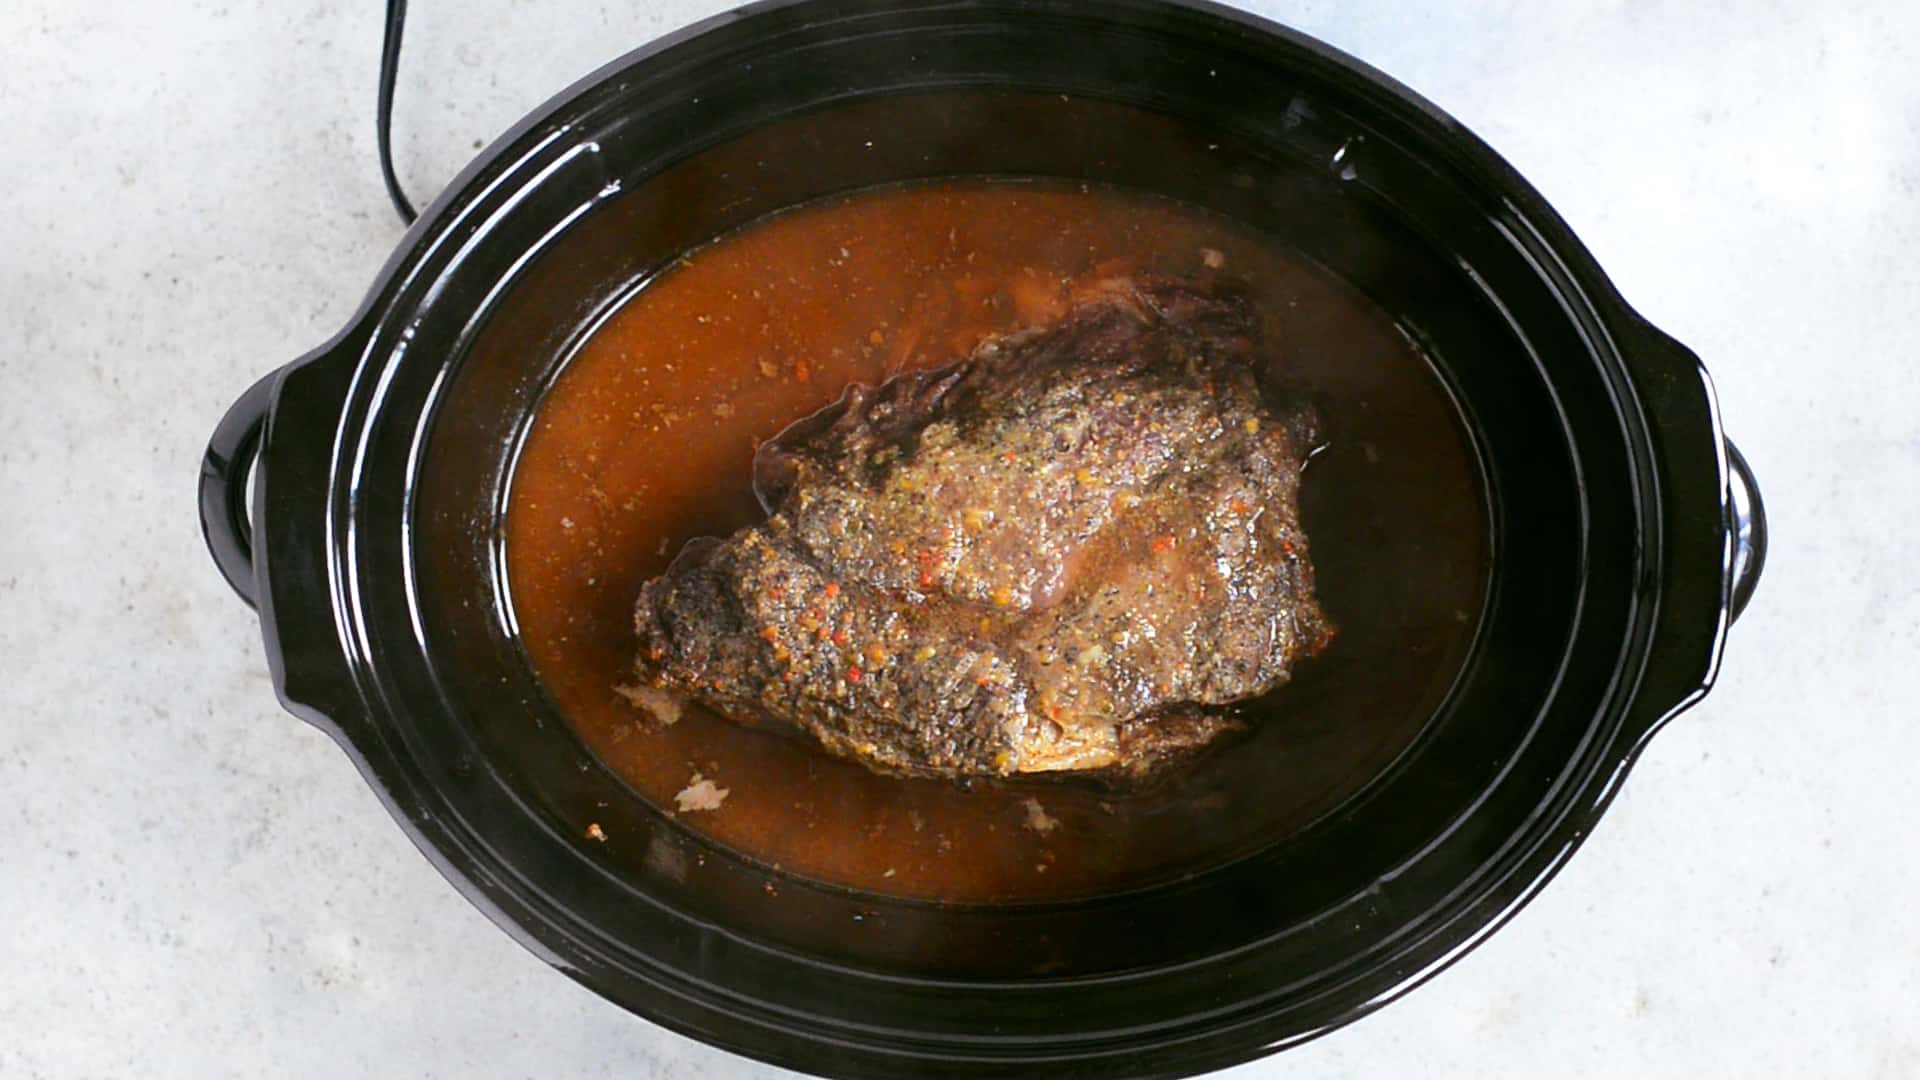 Roast In A Crock Pot With Beef Broth